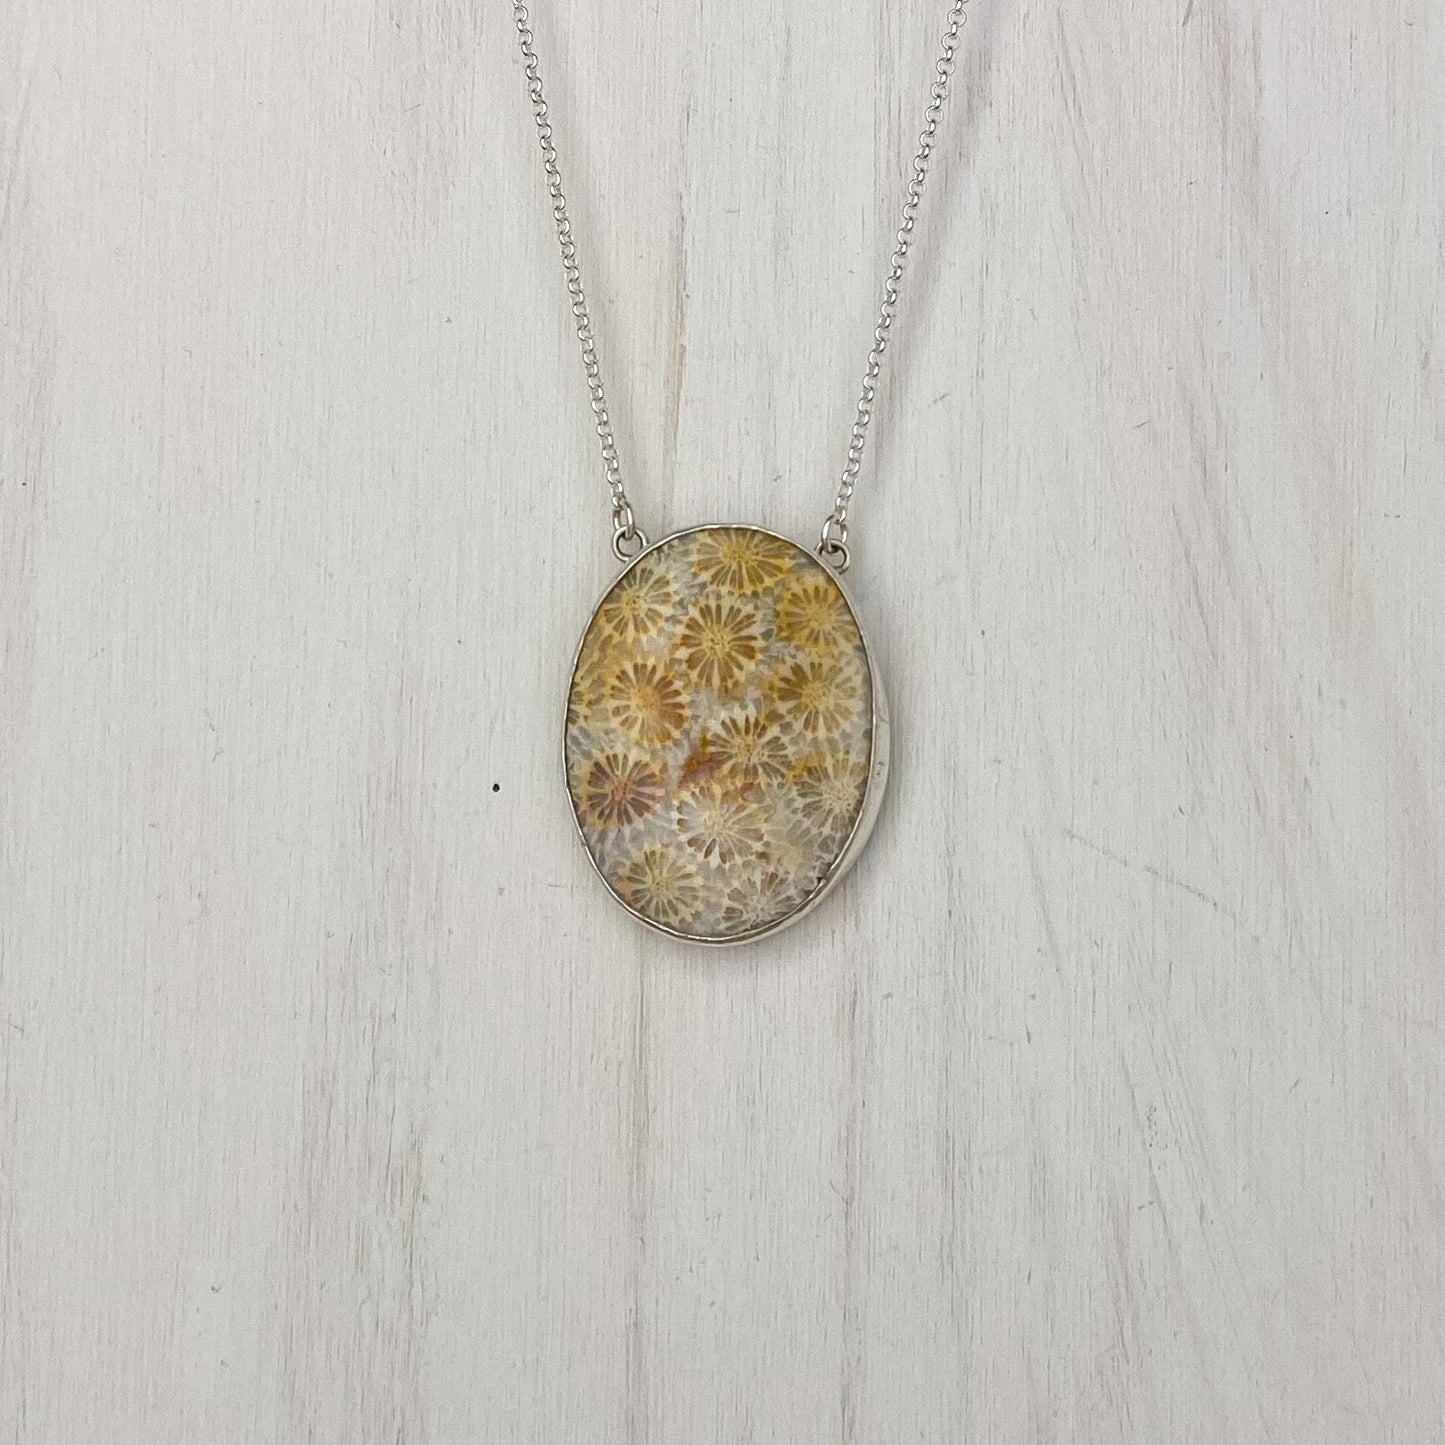 Fossilized Coral Pendant with Flowers